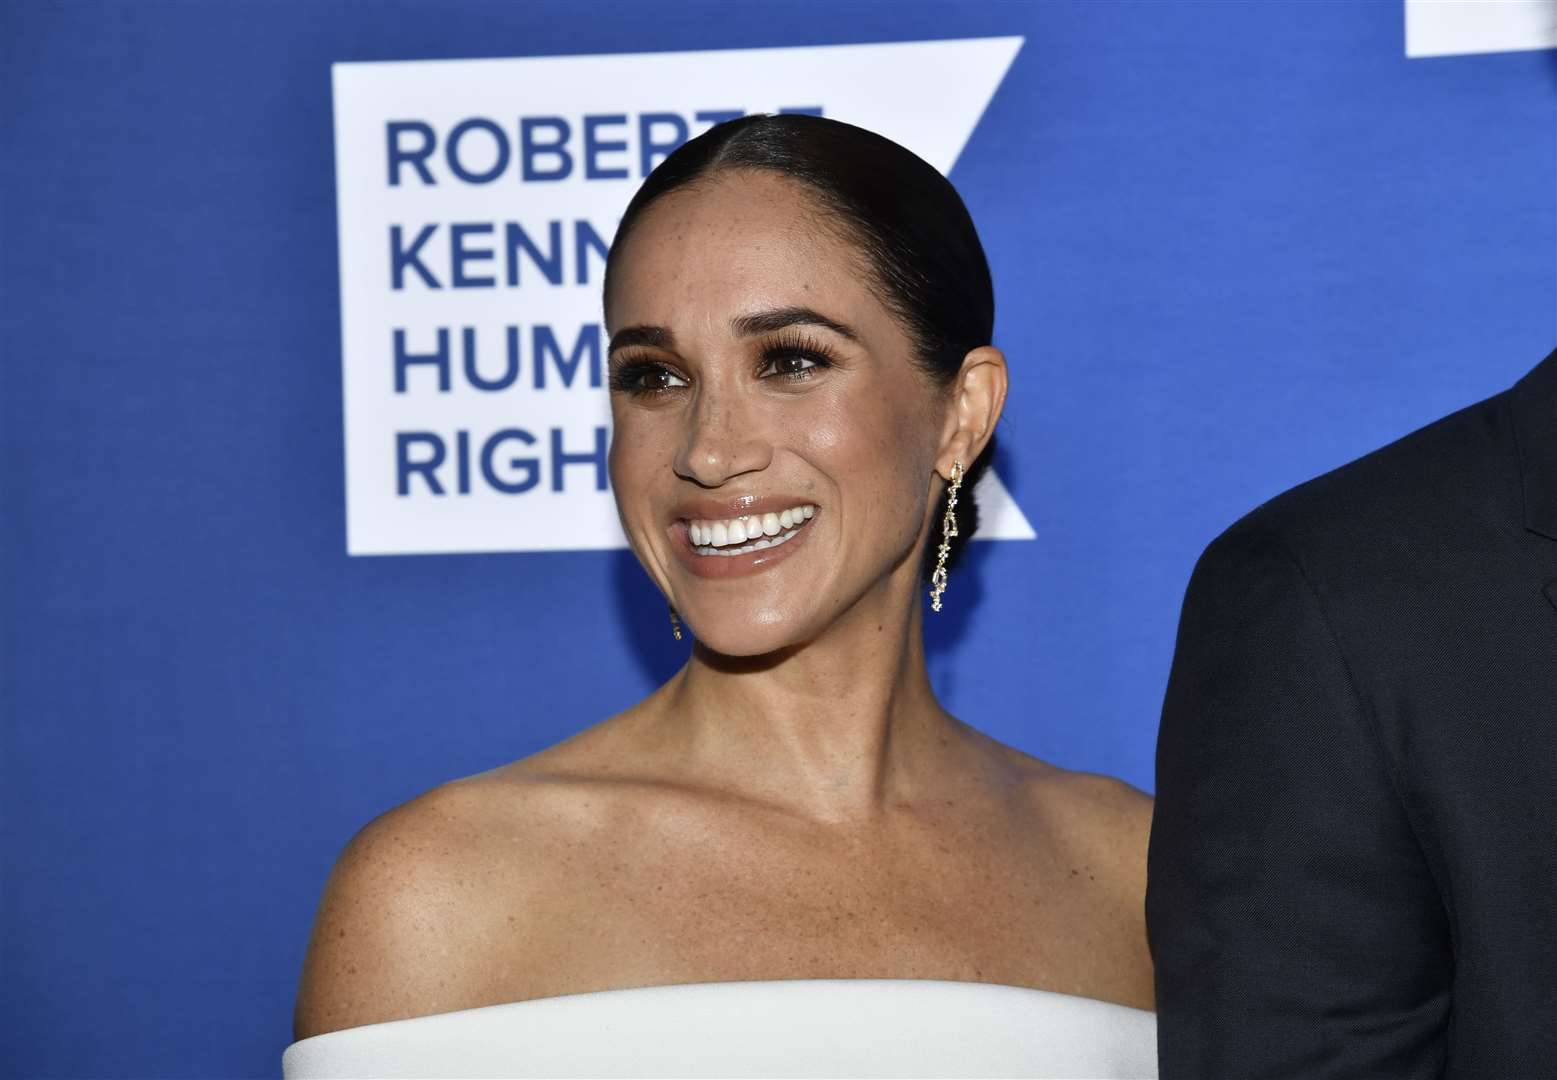 Kerry Kennedy, president of the RFKHR, said Meghan had ‘normalised’ discussion about mental health (Evan Agostini/Invision/PA)